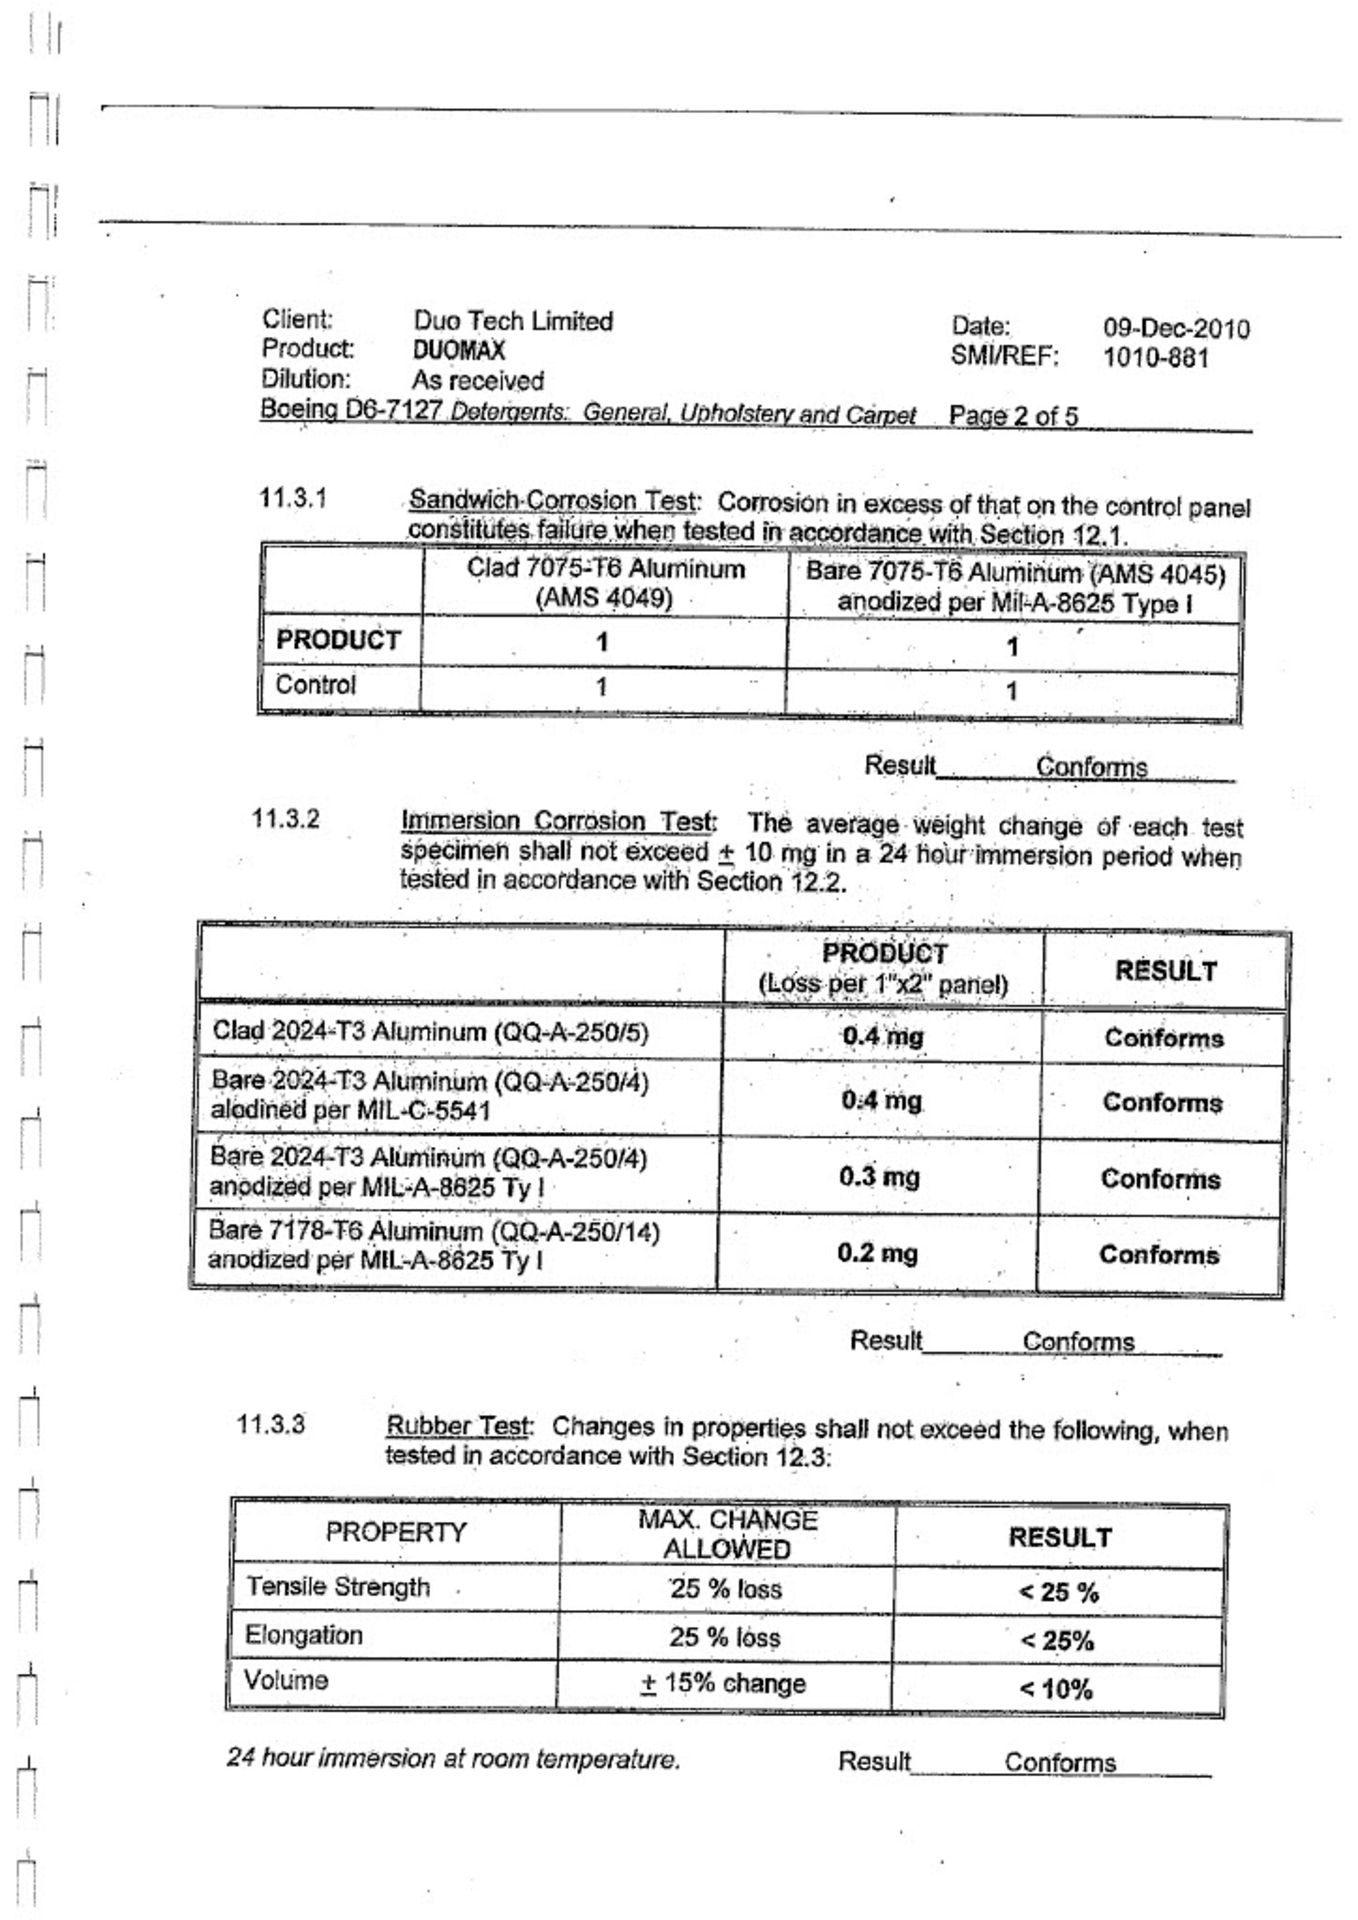 TANK OF DUOMAX SUPER CONCENTRATED DISINFECTANT, MADE IN UK, MARCH 2020, ALL DOCUMENTS ATTACHED - Image 32 of 75